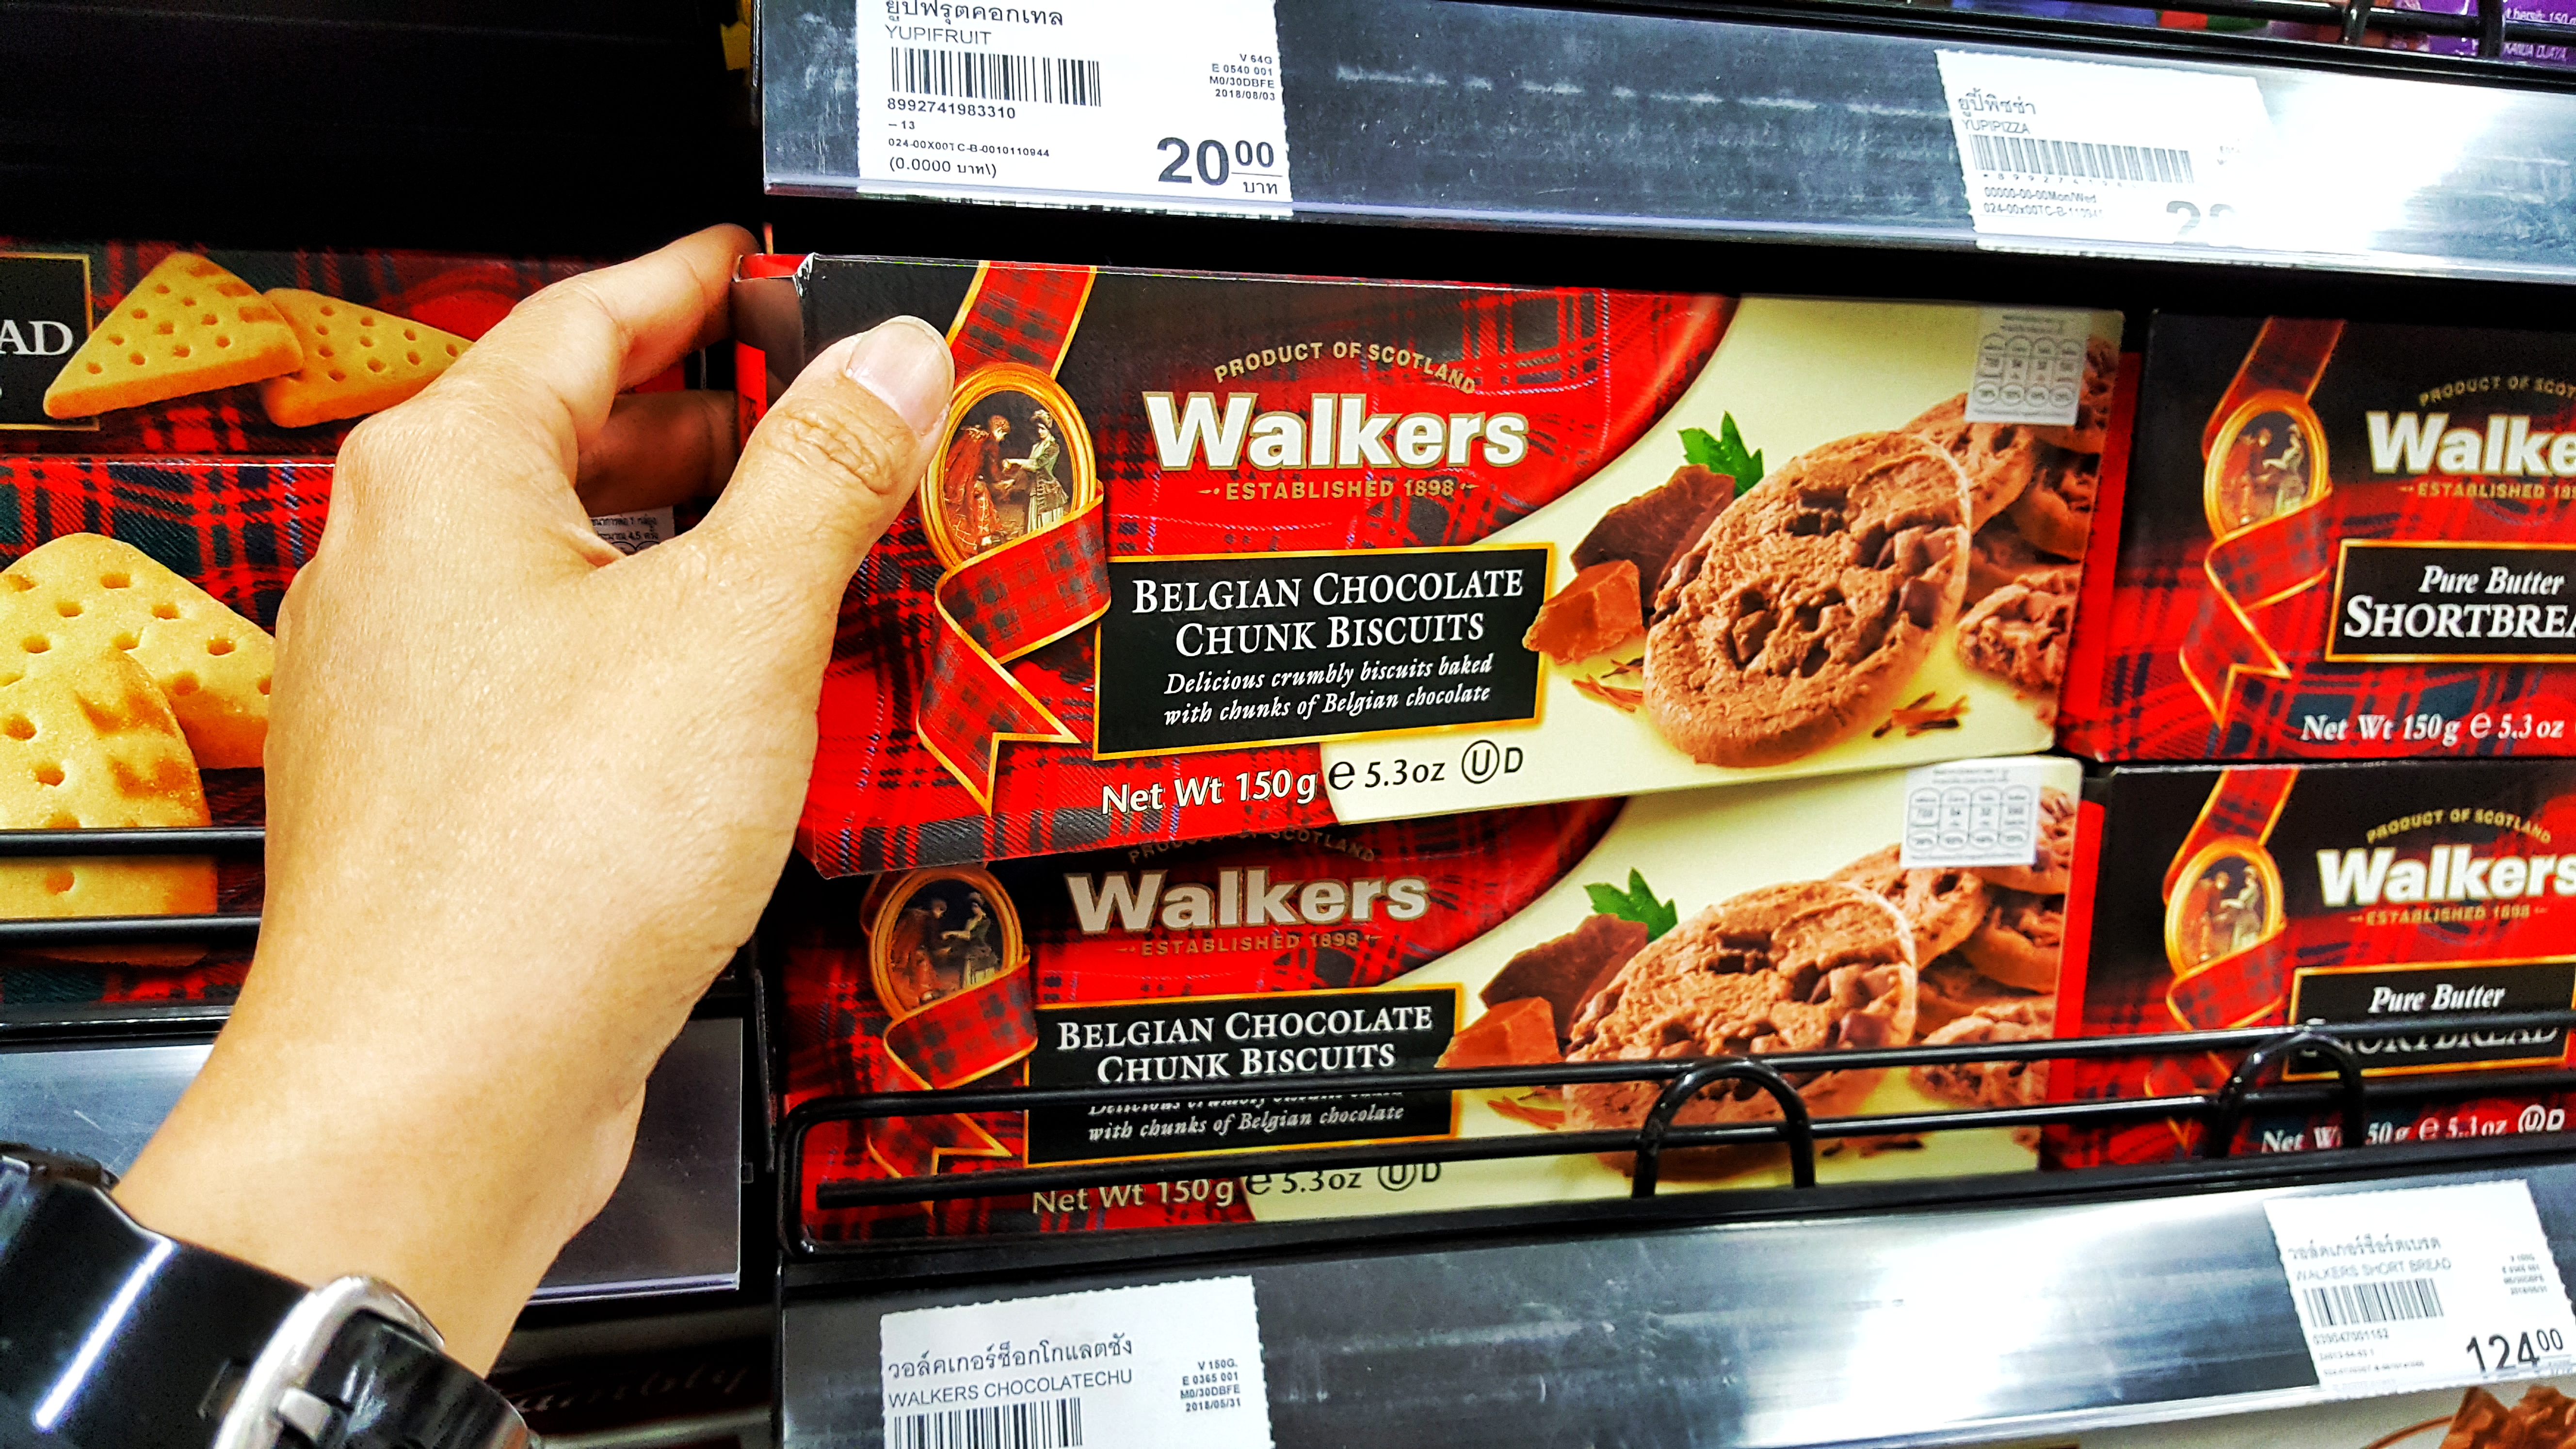 Walkers shortbread and biscuits are sold all over the world